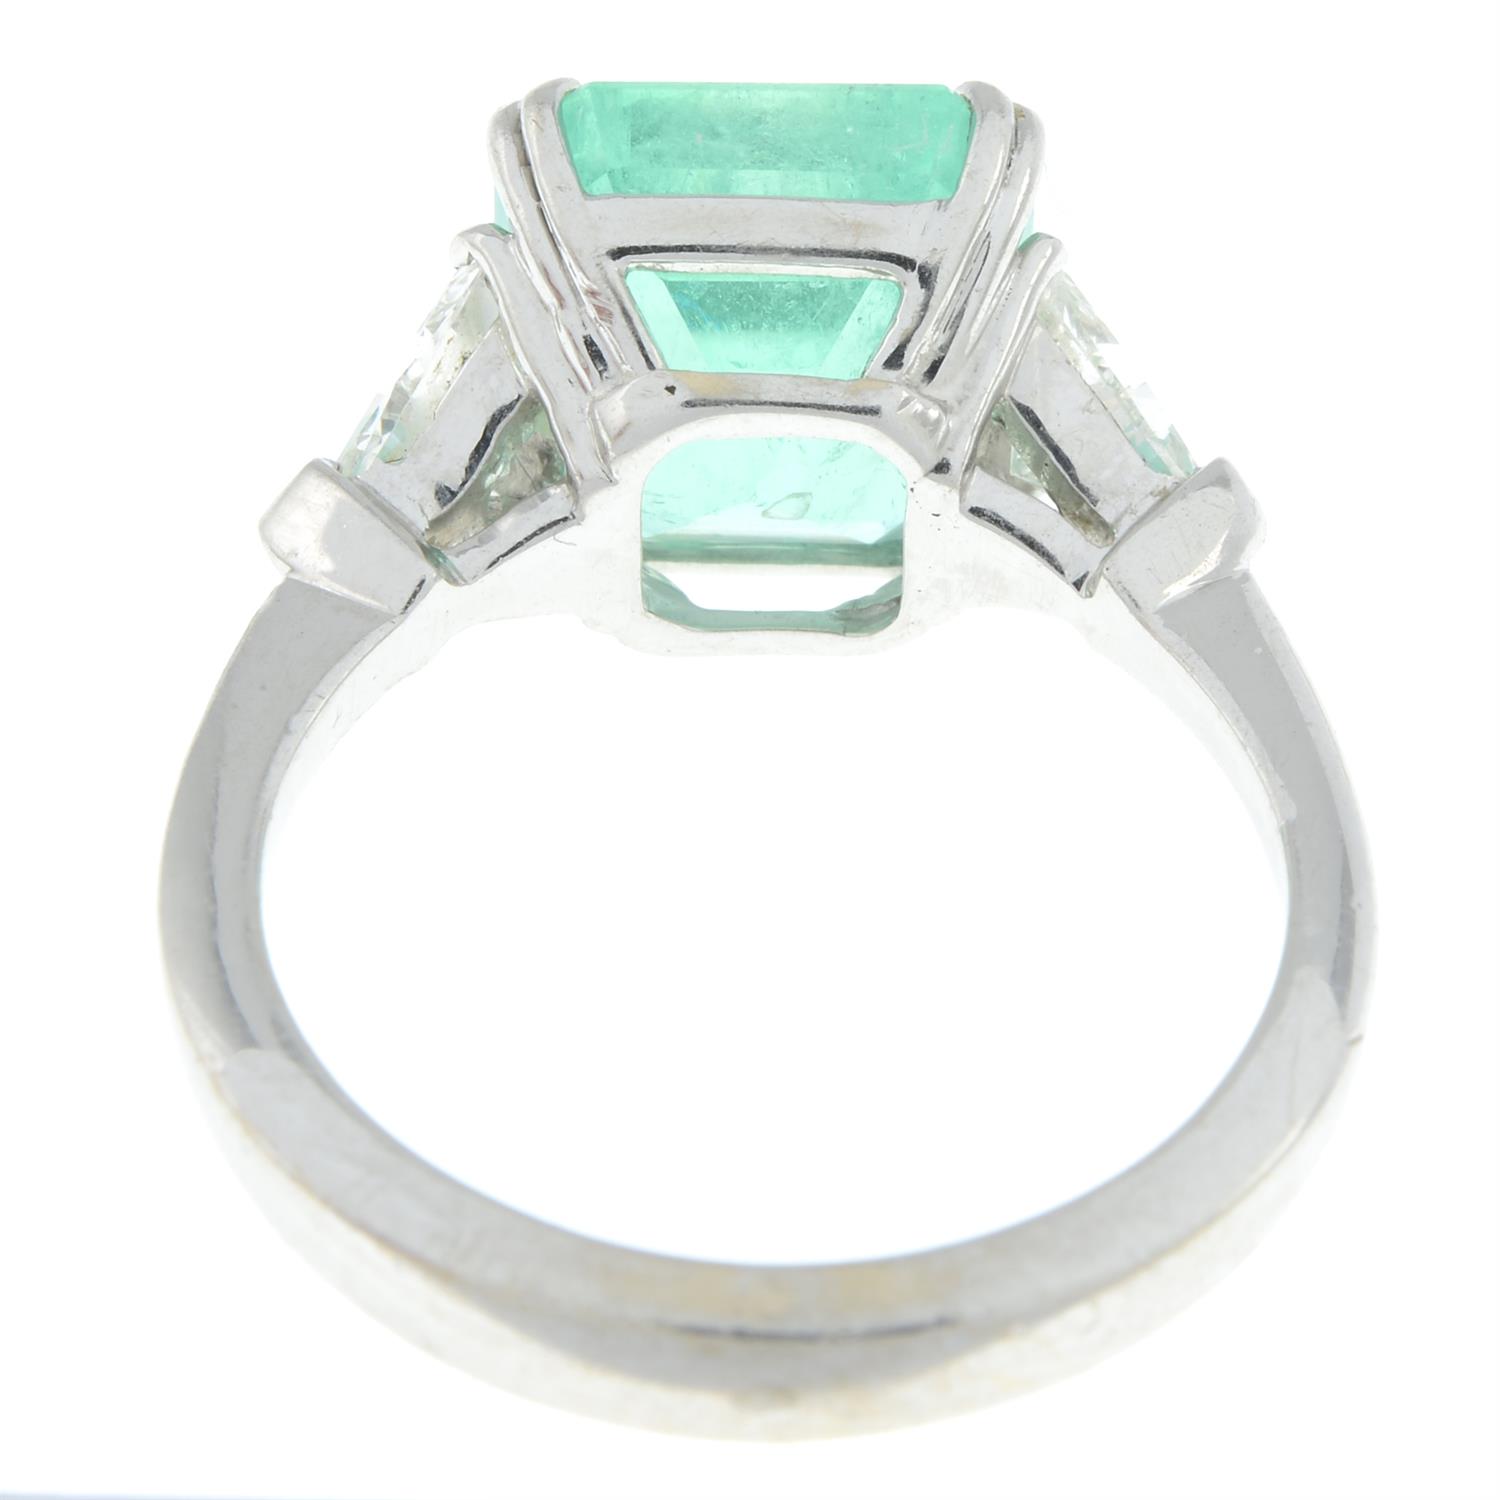 Emerald and diamond ring - Image 3 of 5